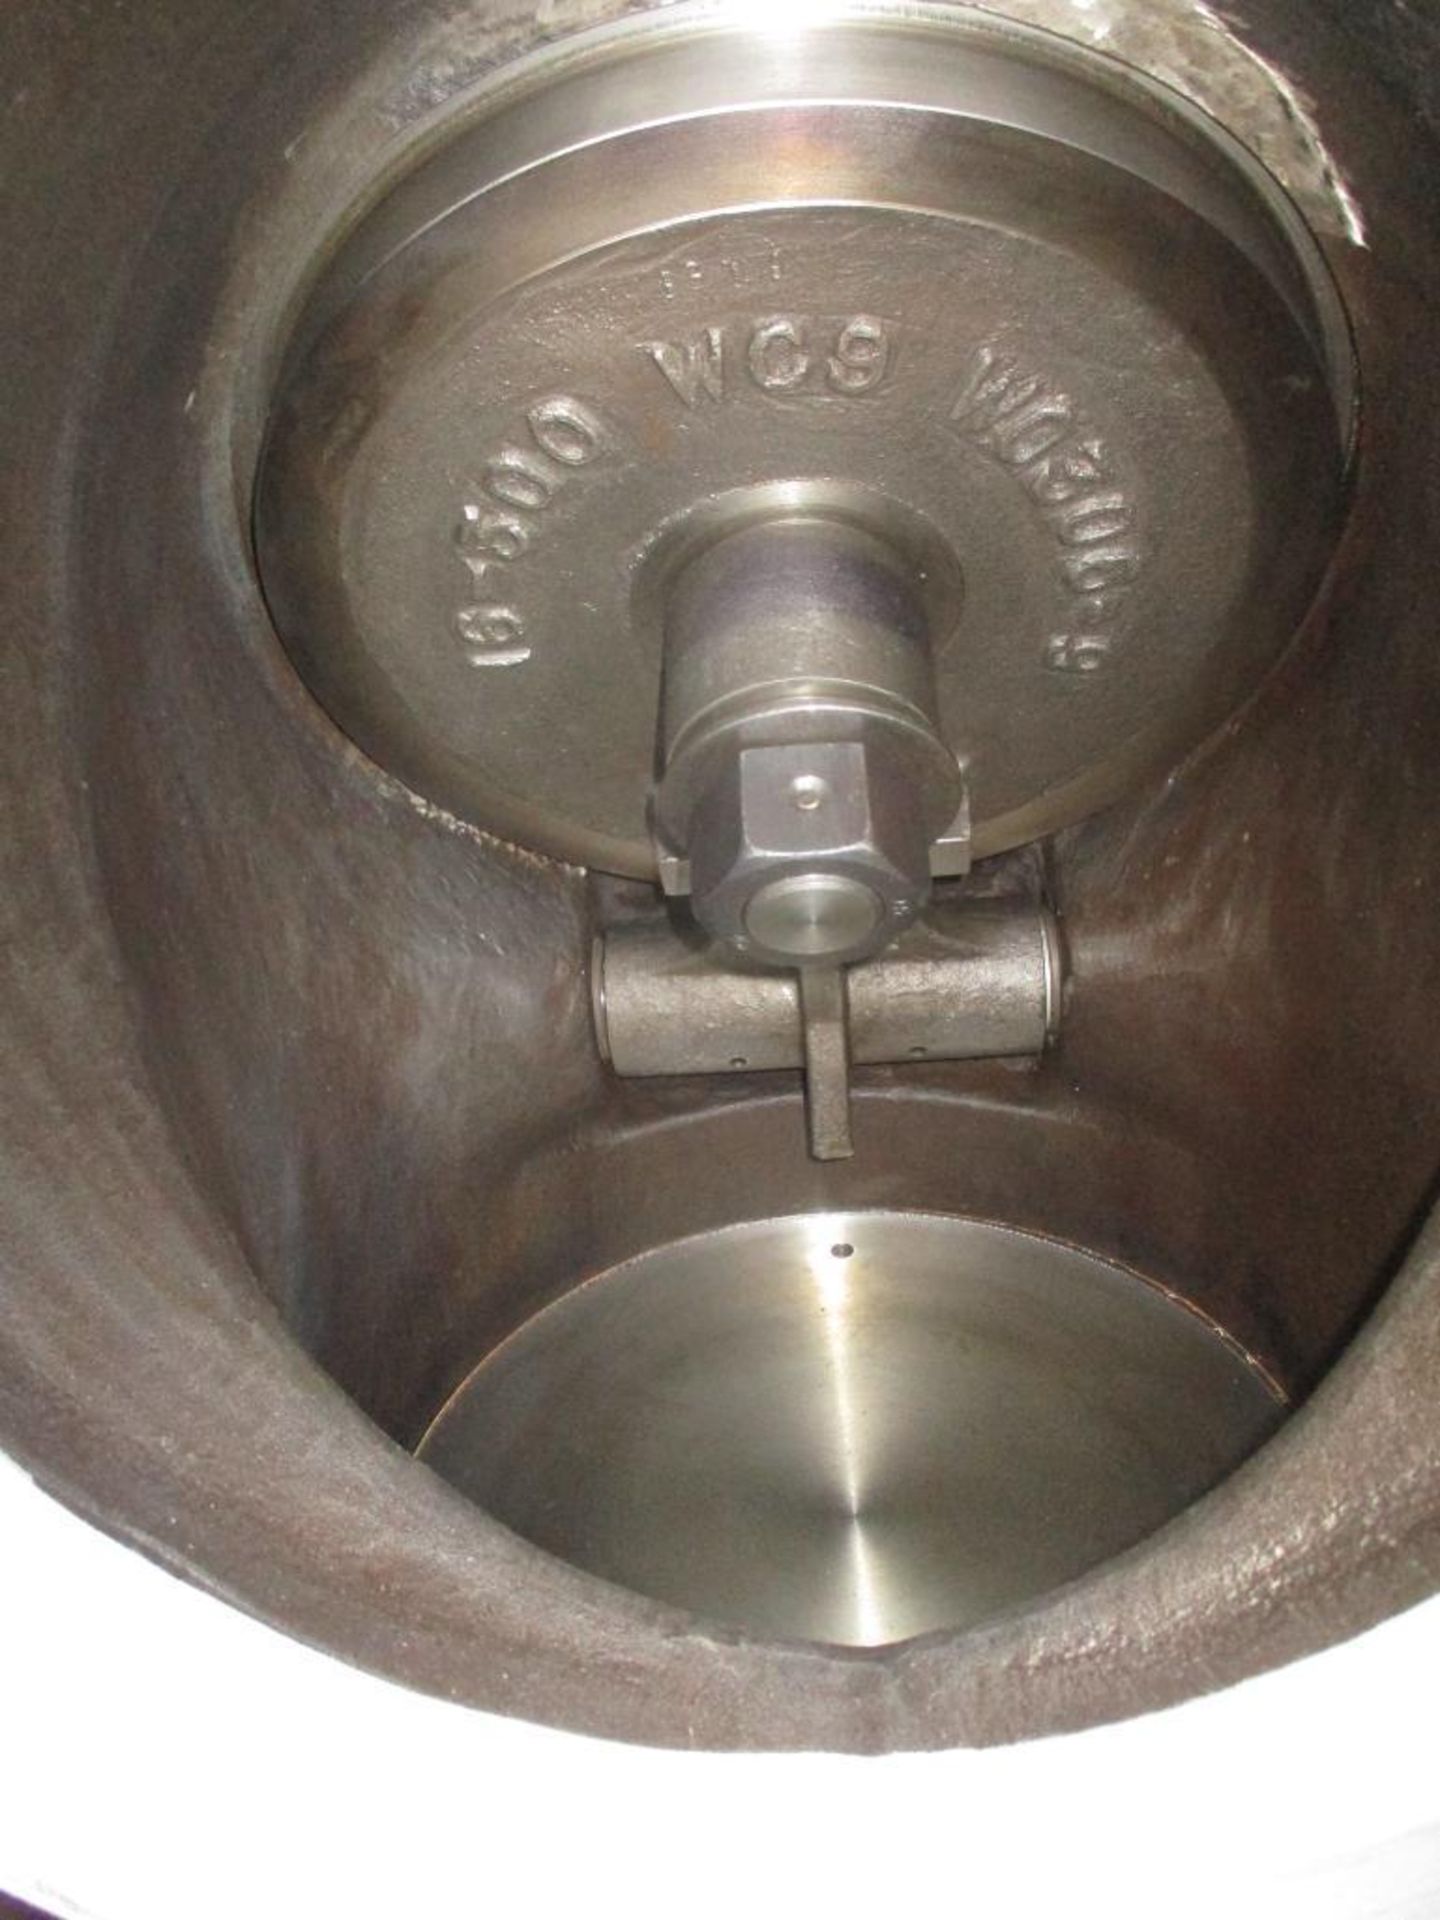 A&M 16" Steel Check Valve, Class 150, 285 PSIG @ 100F, Stem CR13, Disc/Seat CR22 (New), Weir Valves - Image 5 of 7